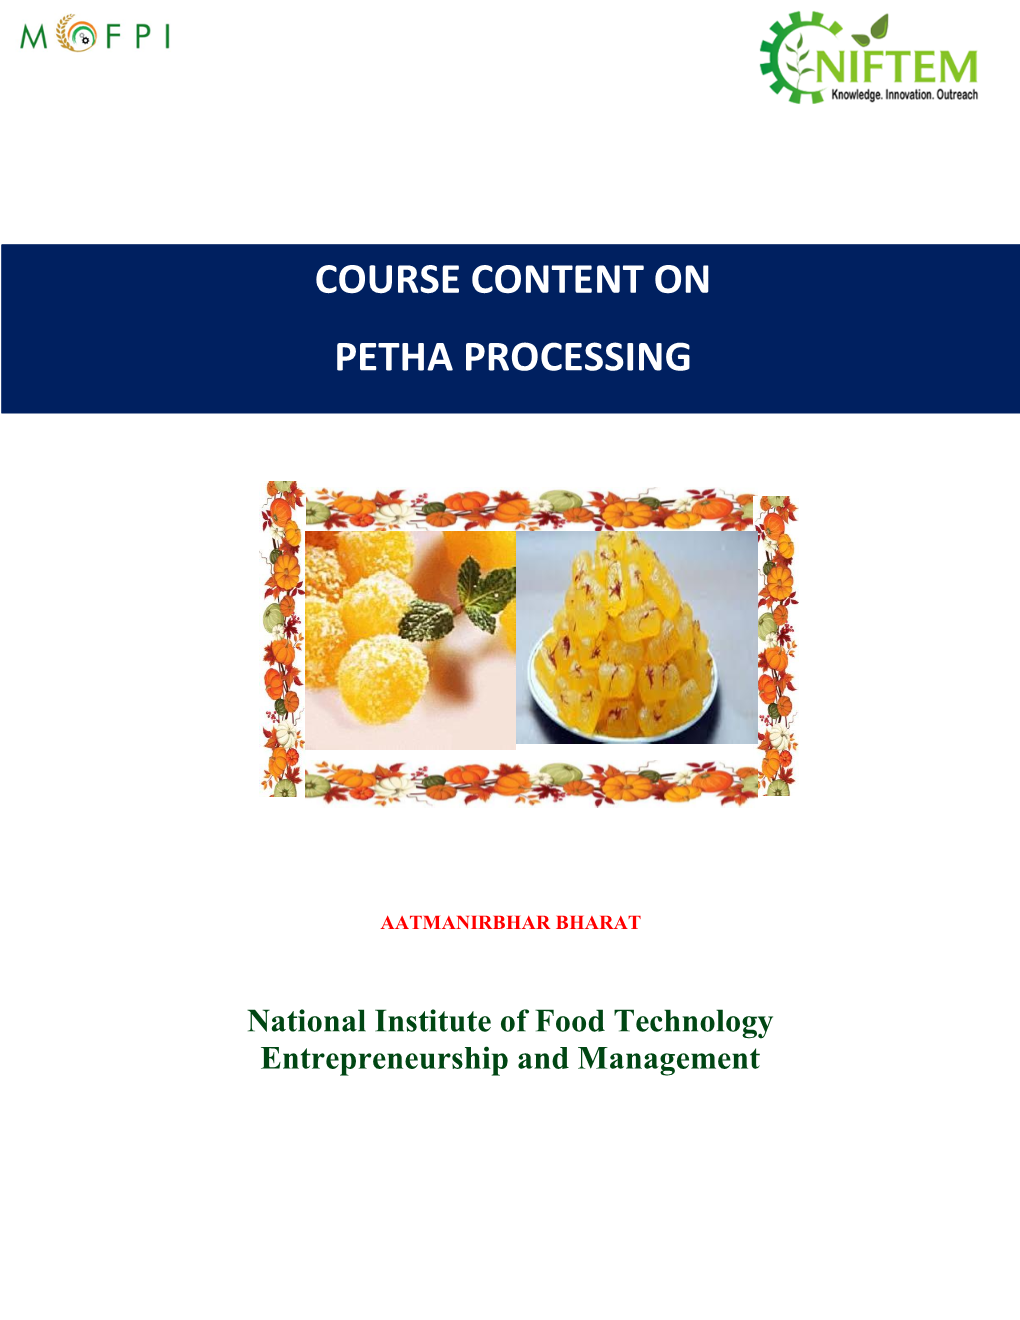 Course Content on Petha Processing